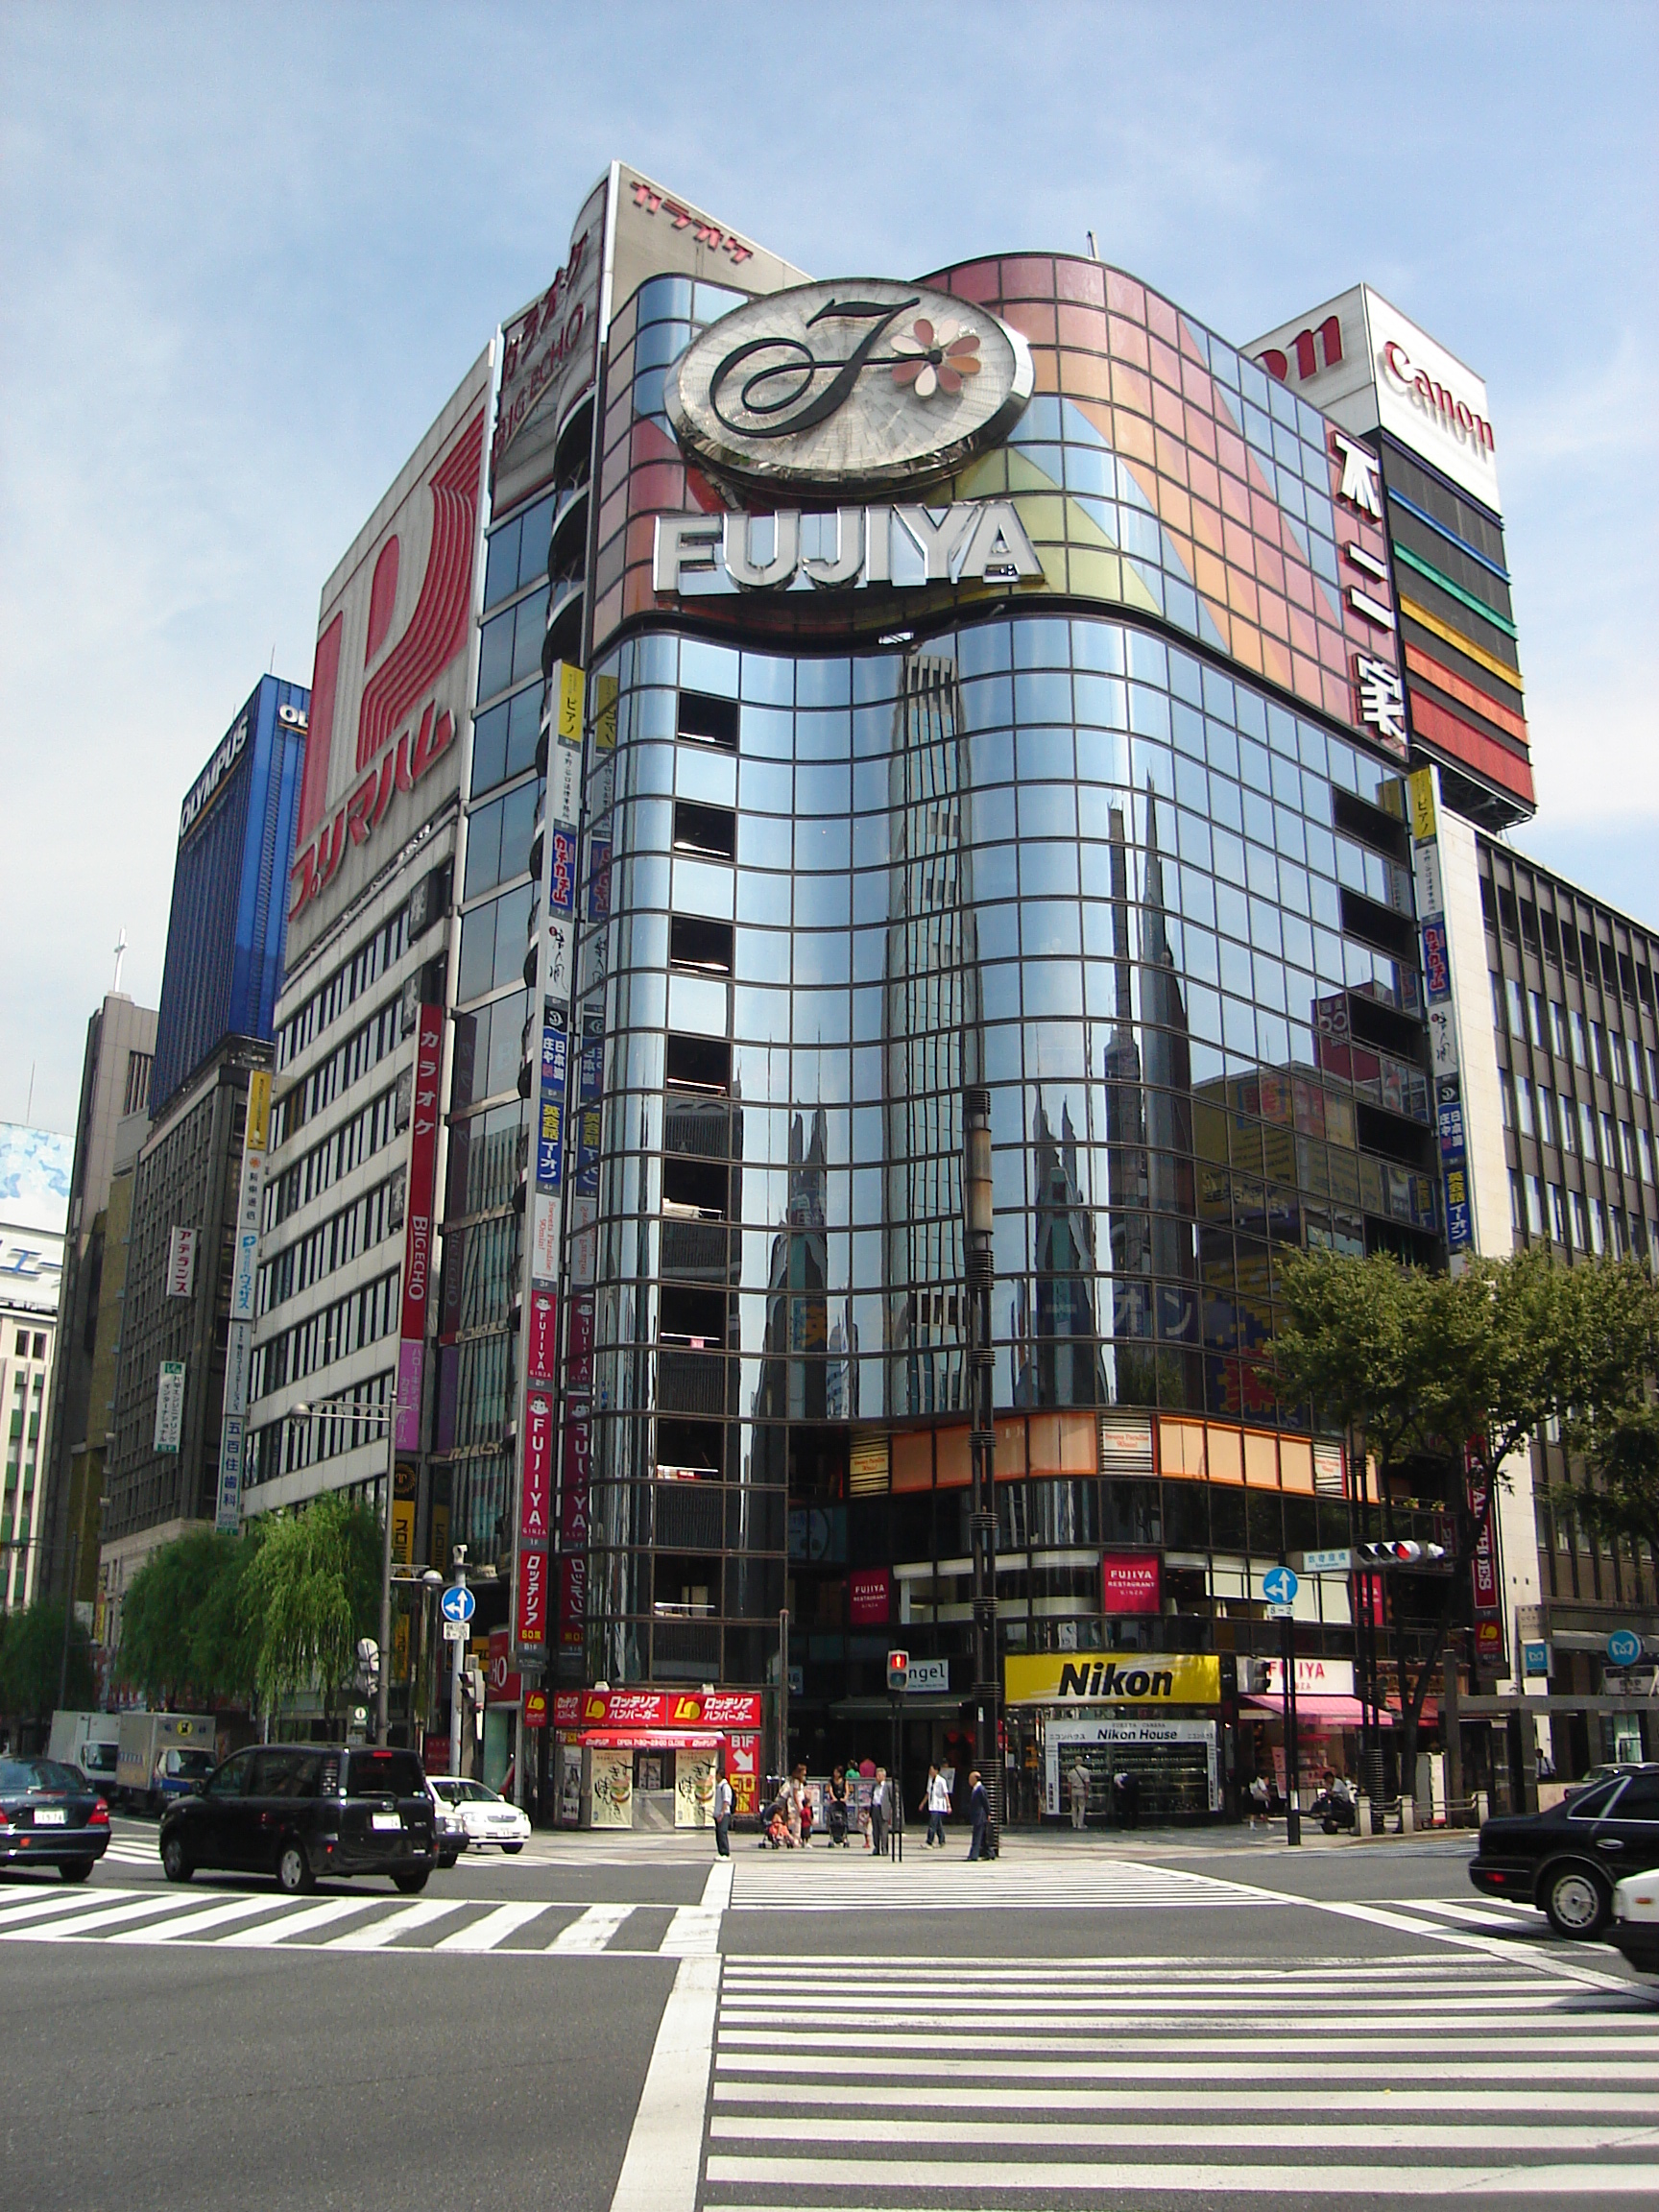 a colourful building with a wavy front and a large fujiya logo